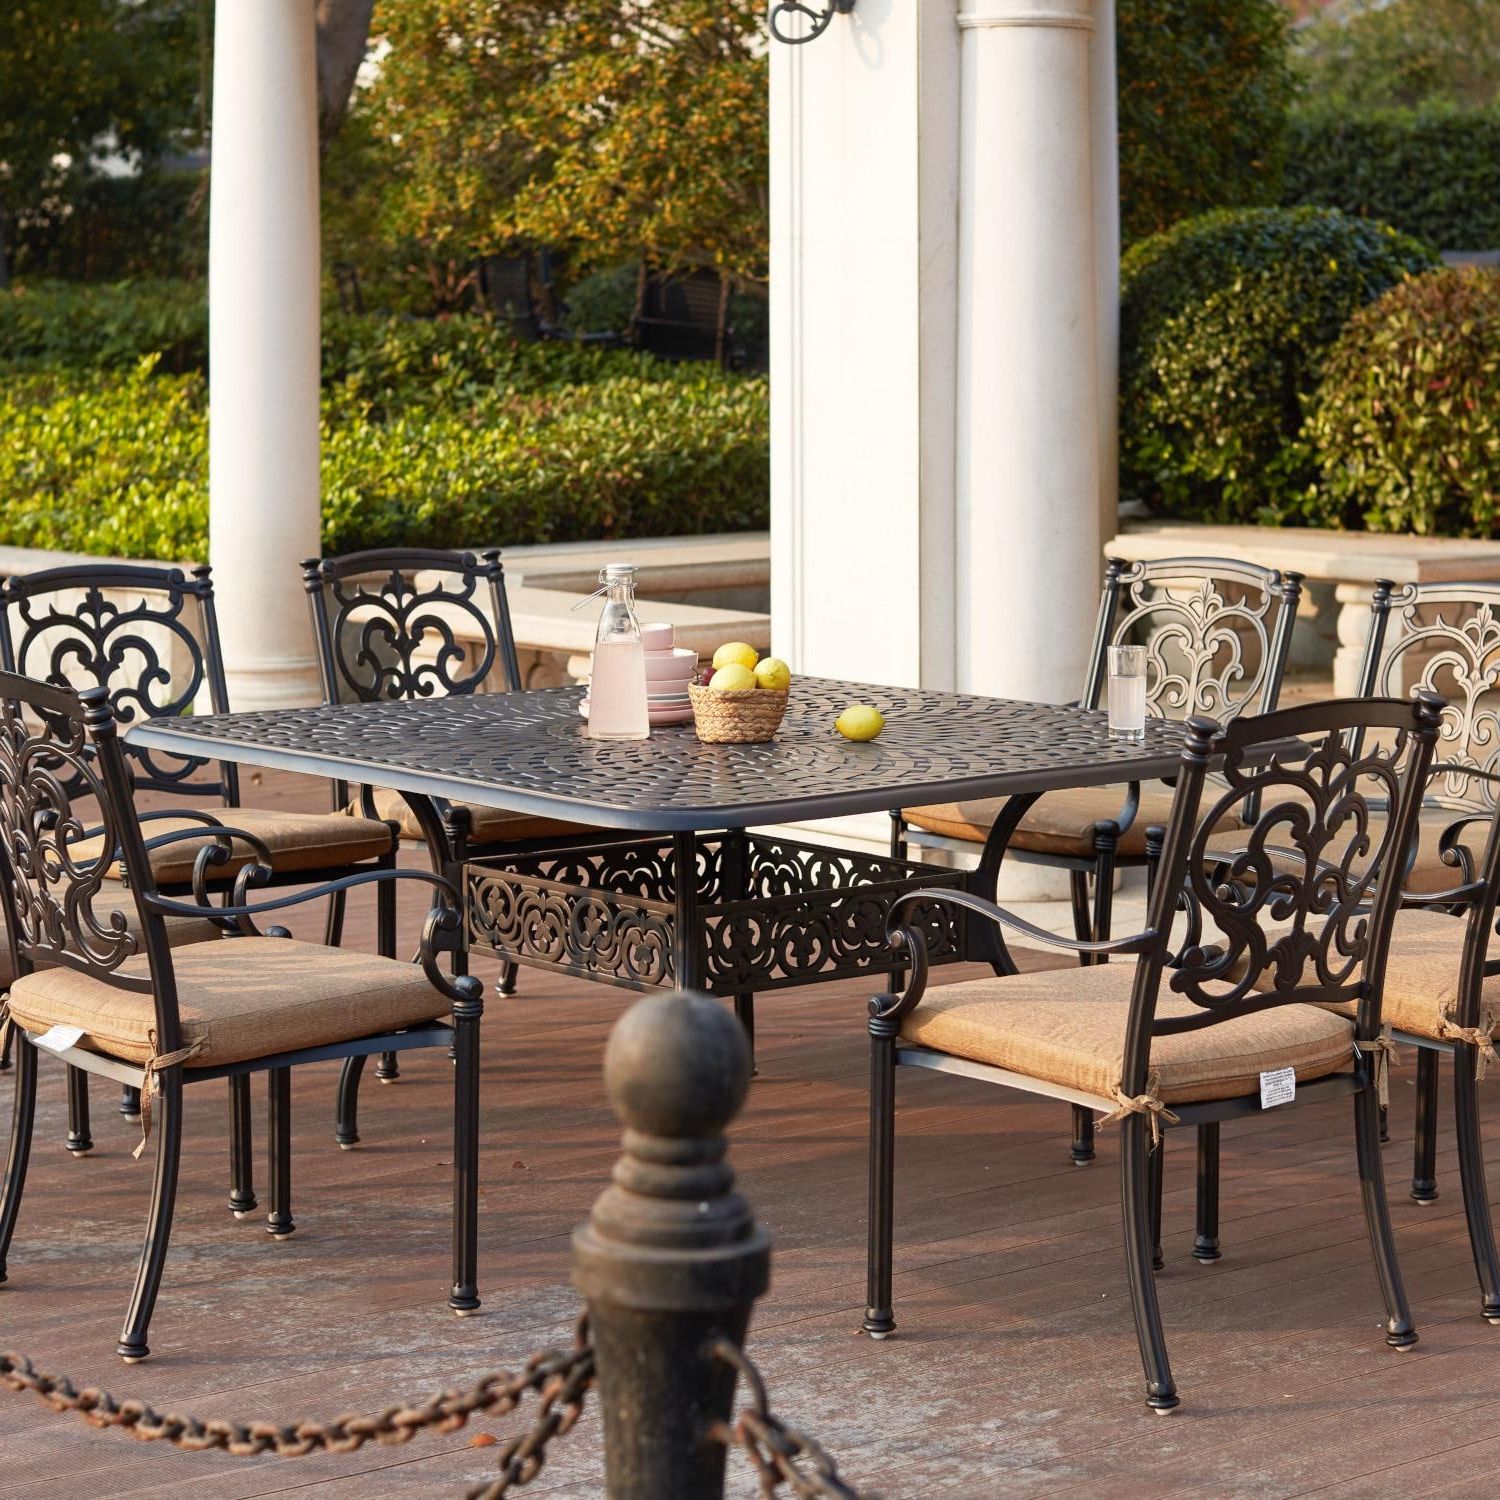 Most Popular Darlee Santa Barbara 9 Piece Cast Aluminum Patio Dining Set With Square Regarding Square 9 Piece Outdoor Dining Sets (View 1 of 15)